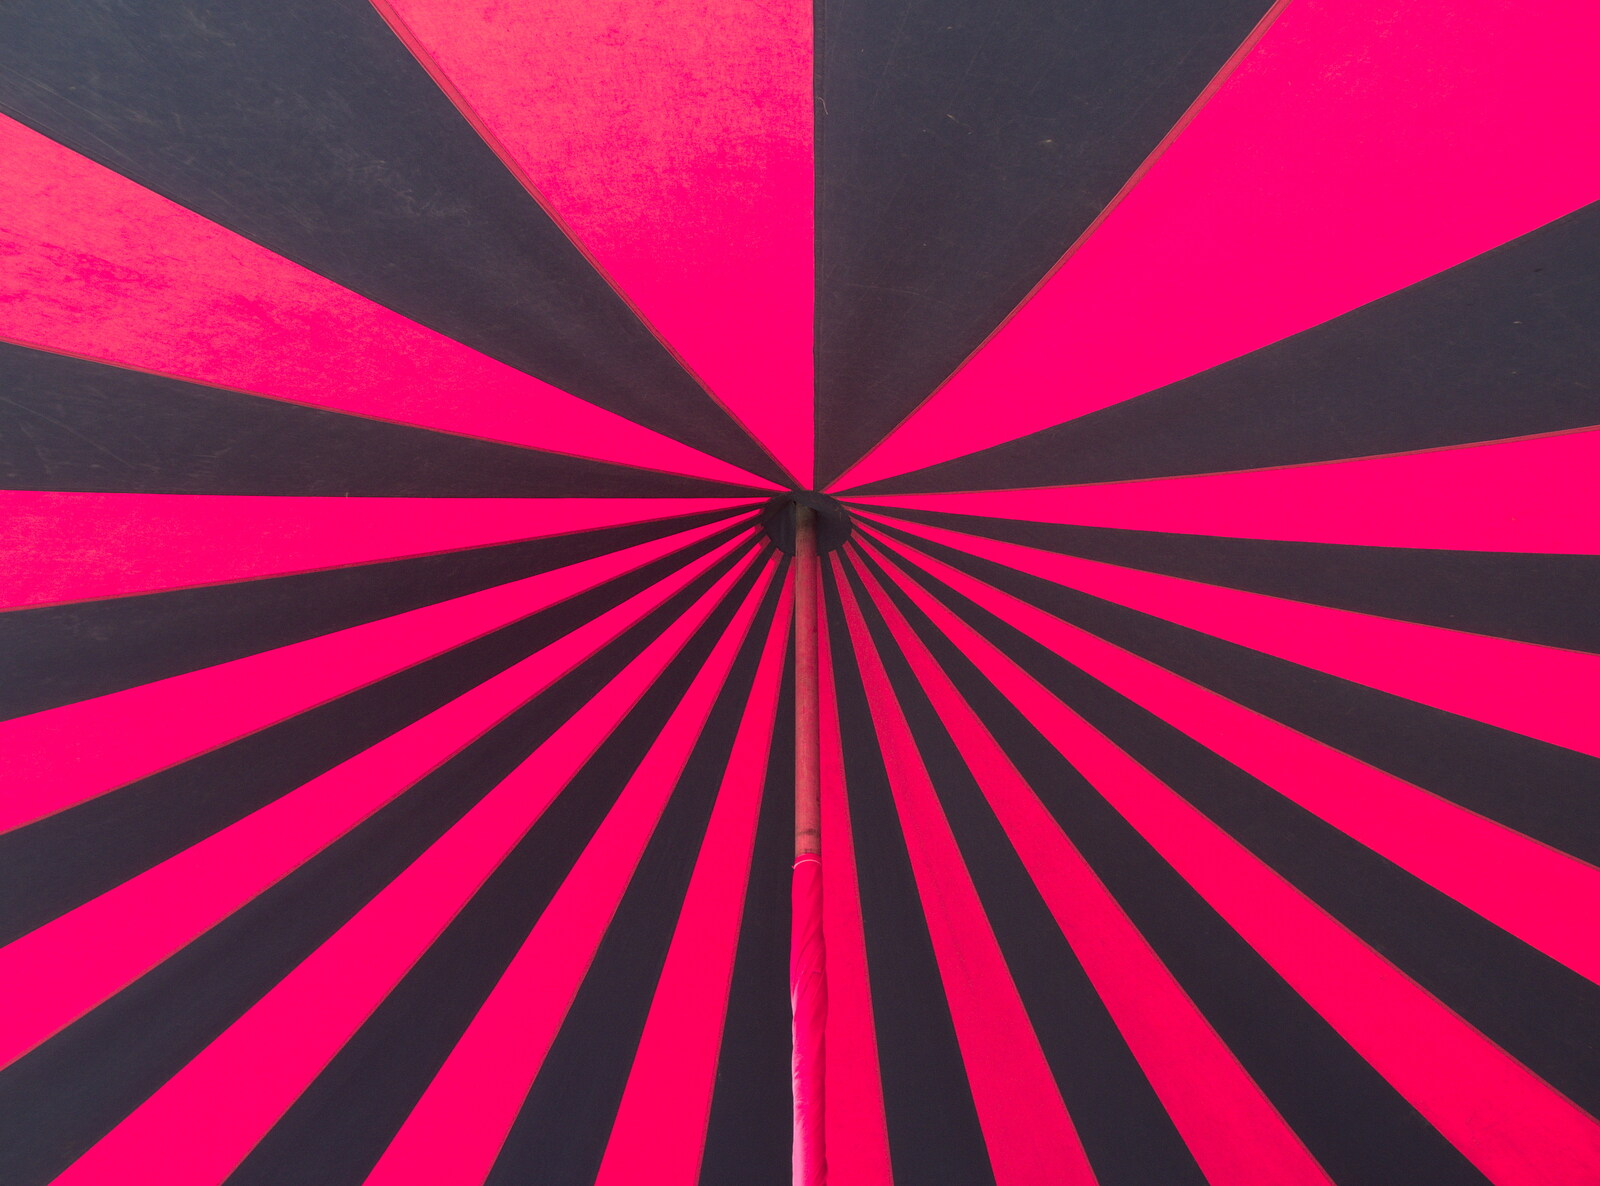 Circus-tent stripes from WoW Festival, Burston, Norfolk - 29th June - 1st July 2018